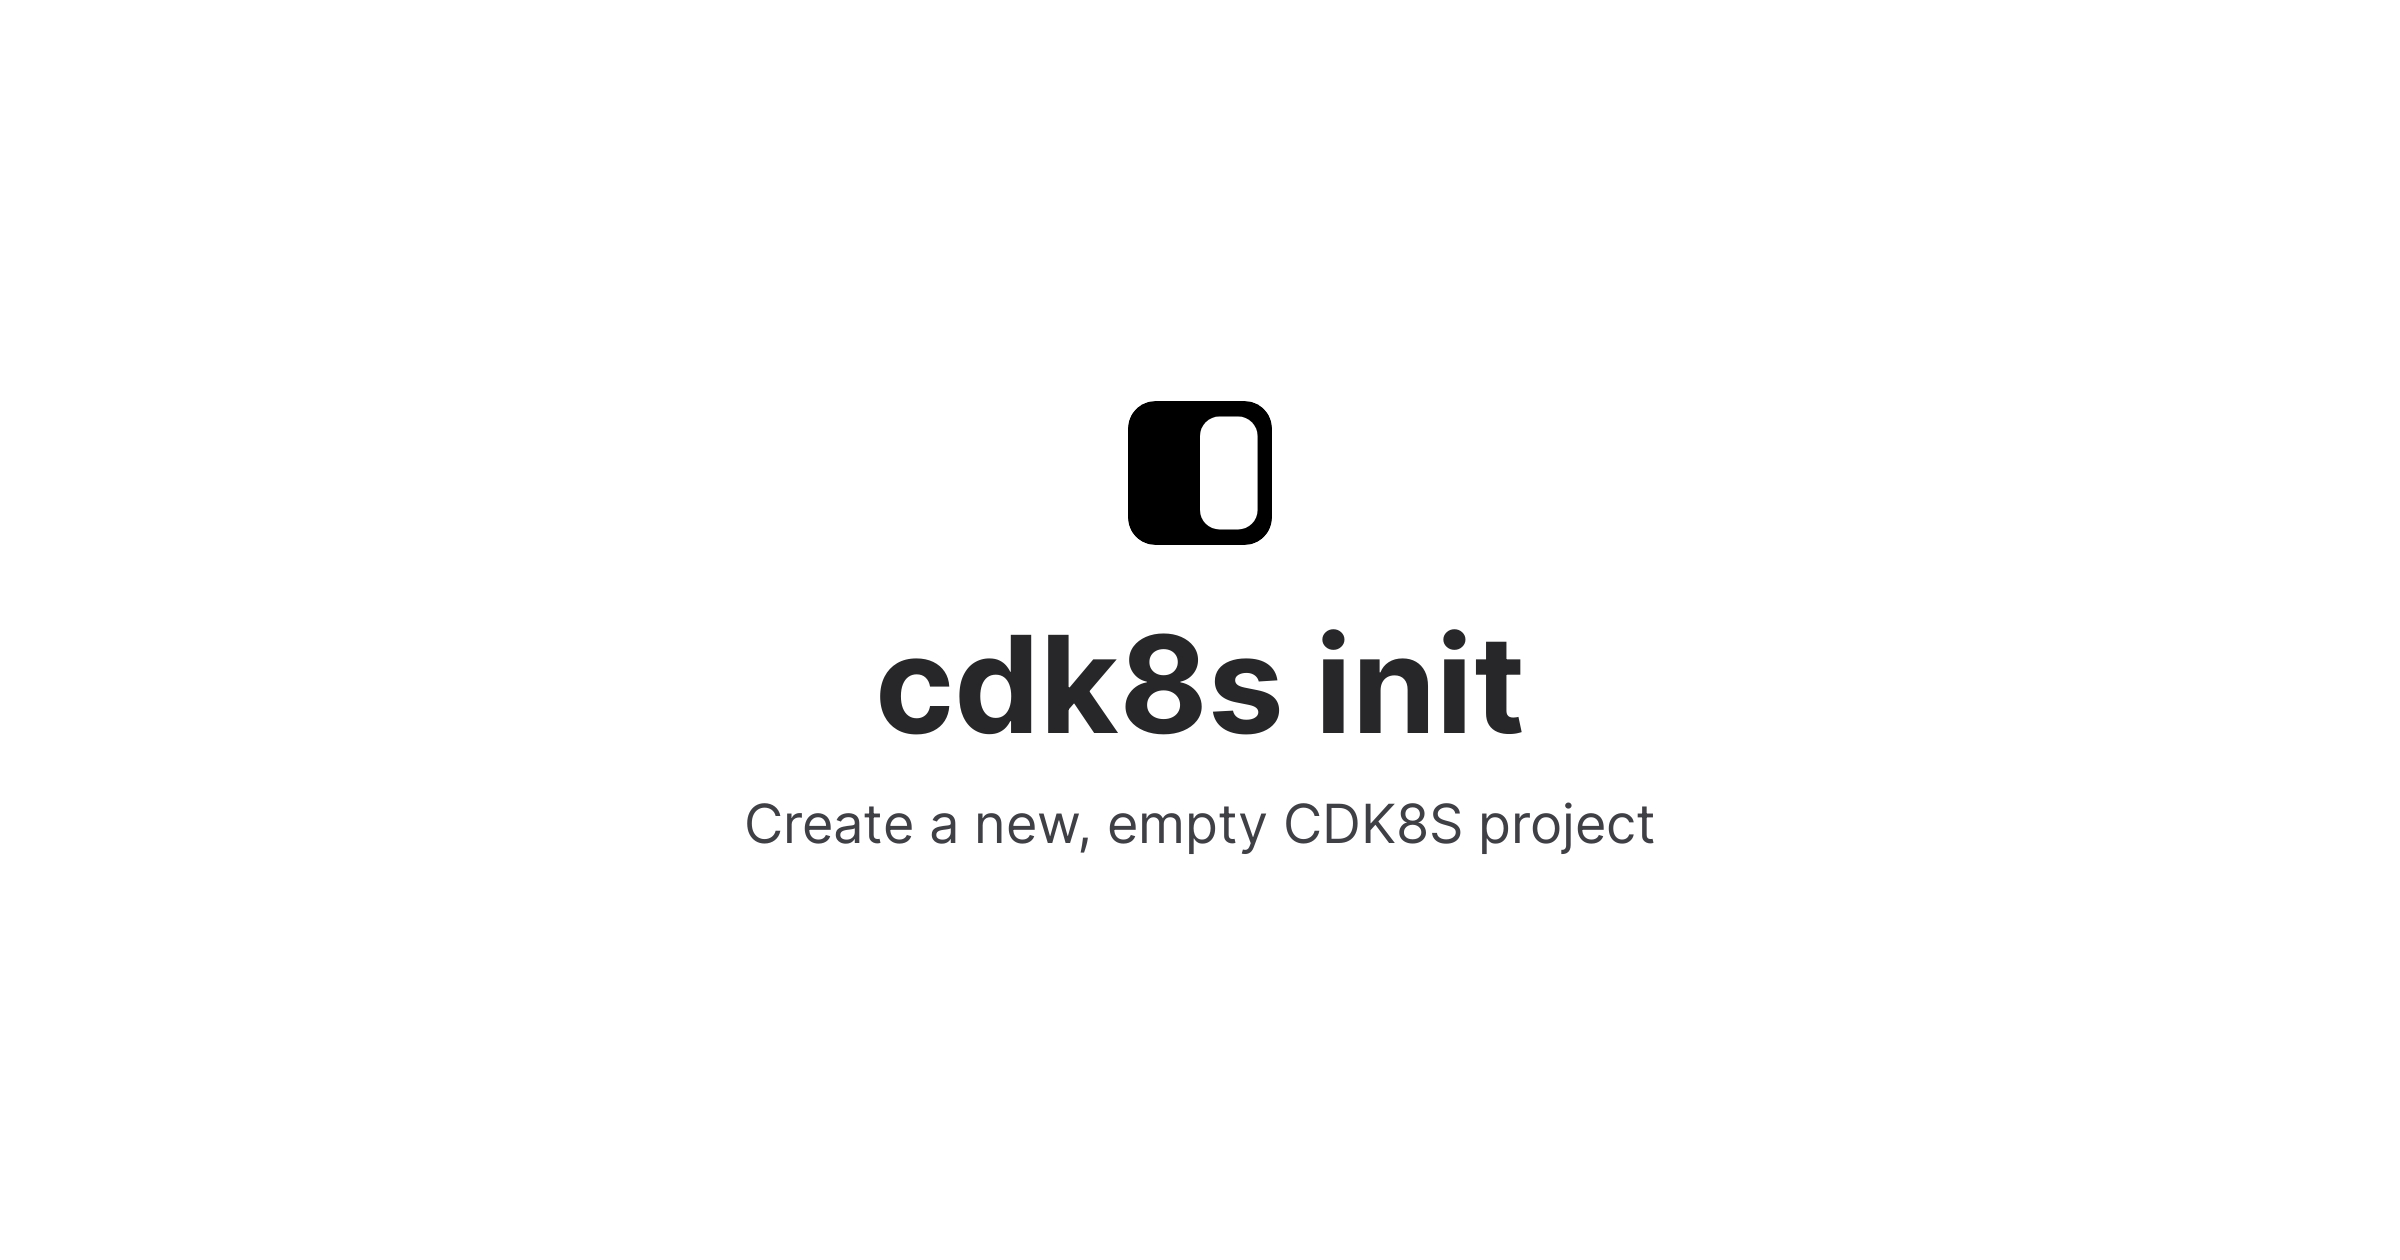 Og?fontFamily=Inter&title=cdk8s Init&titleTailwind=text Gray 800 Font Bold Text 6xl&text=Create A New, Empty CDK8S Project&textTailwind=text Gray 700 Text 2xl Mt 4&logoUrl=https   Fig.io Icons Fig.svg&logoTailwind=bg Transparent Mx Auto Mb 8 H 16 W 16&bgTailwind=bg White&footerTailwind=text Teal 600